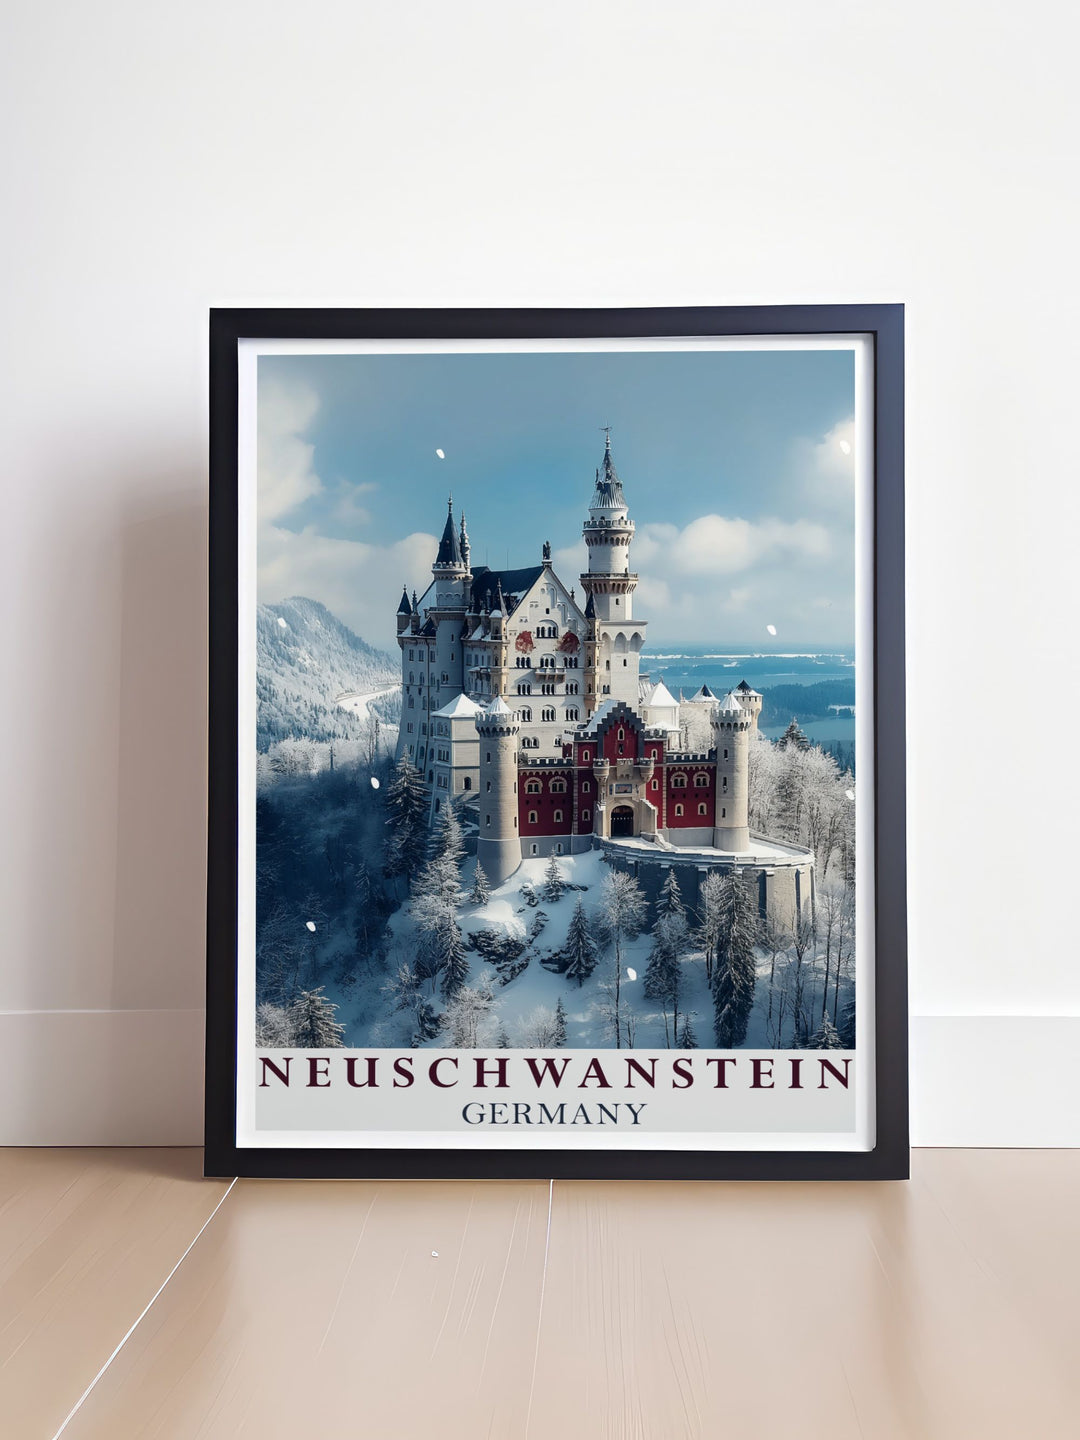 Timeless Neuschwanstein Castle wall art including street map and vintage print designs. This collection adds a nostalgic and sophisticated appeal to any room decor.